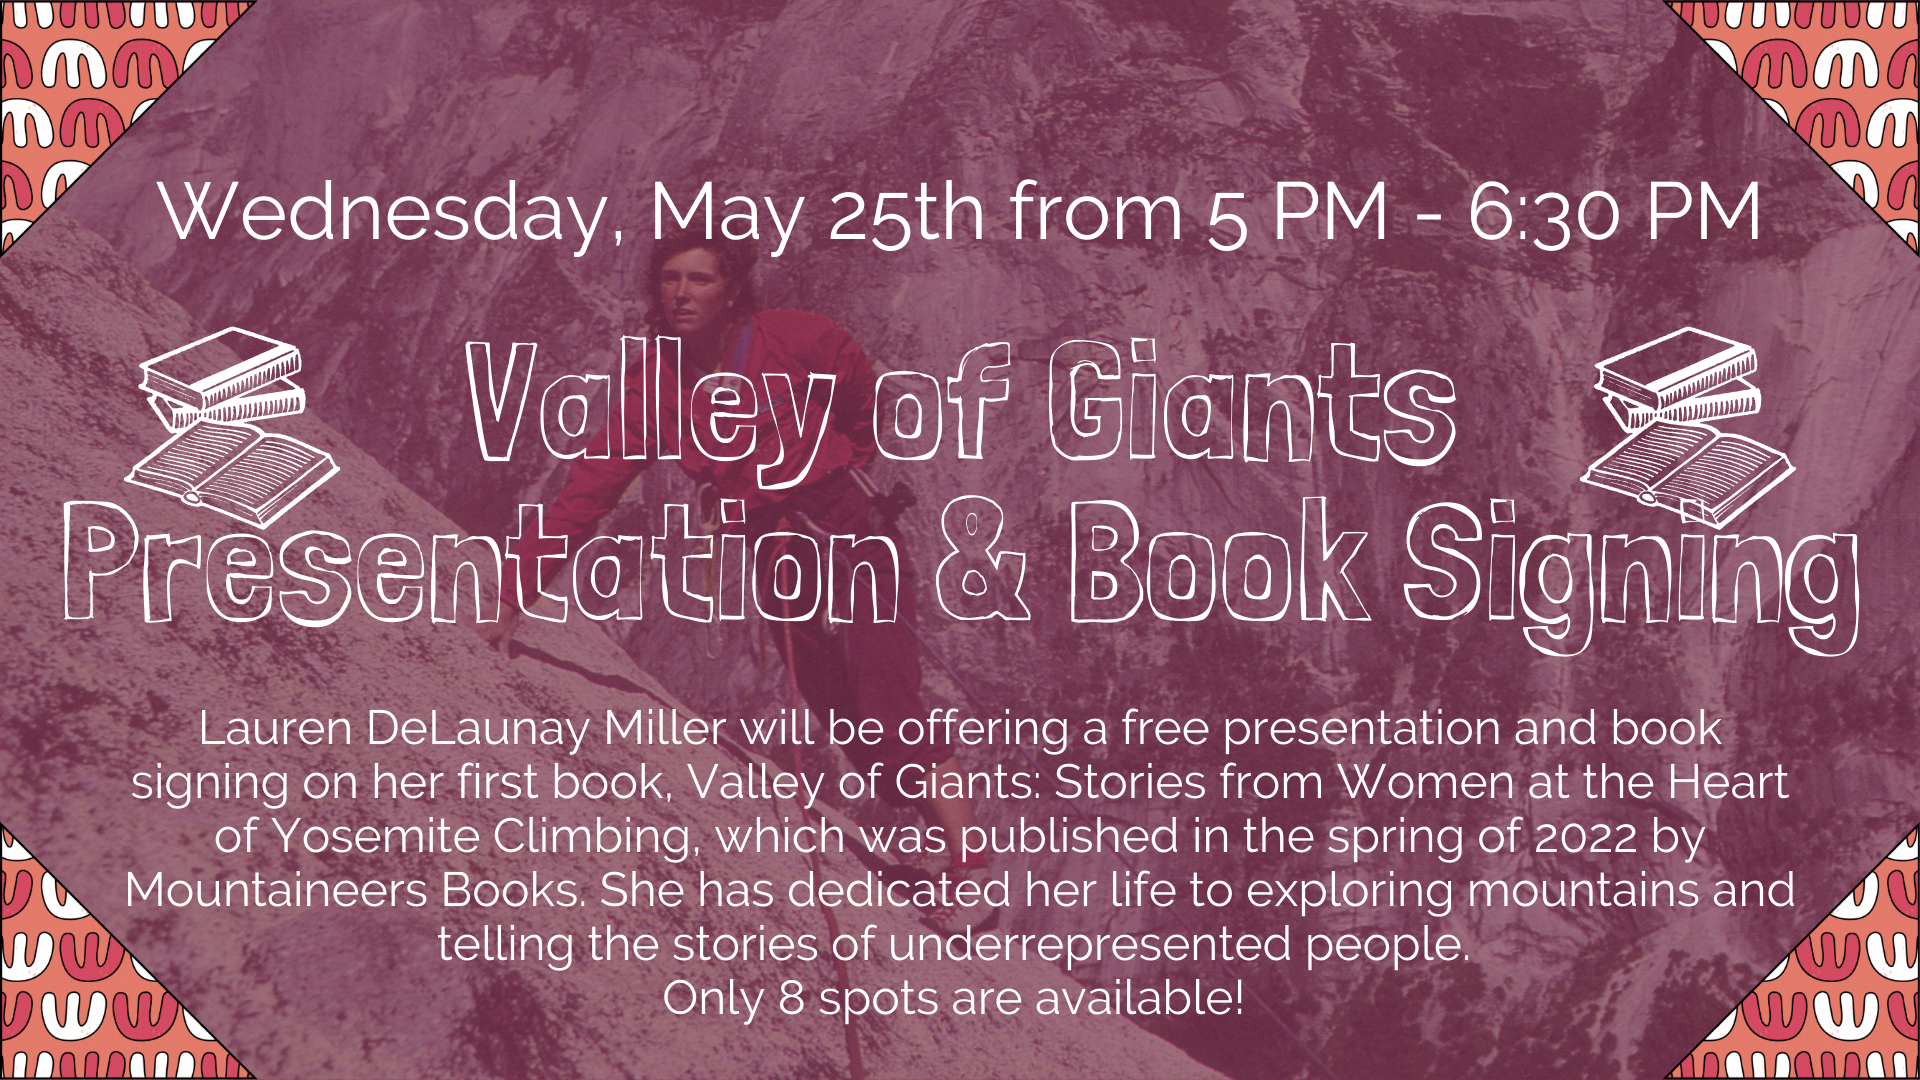 Valley of Giants presentation and book signing